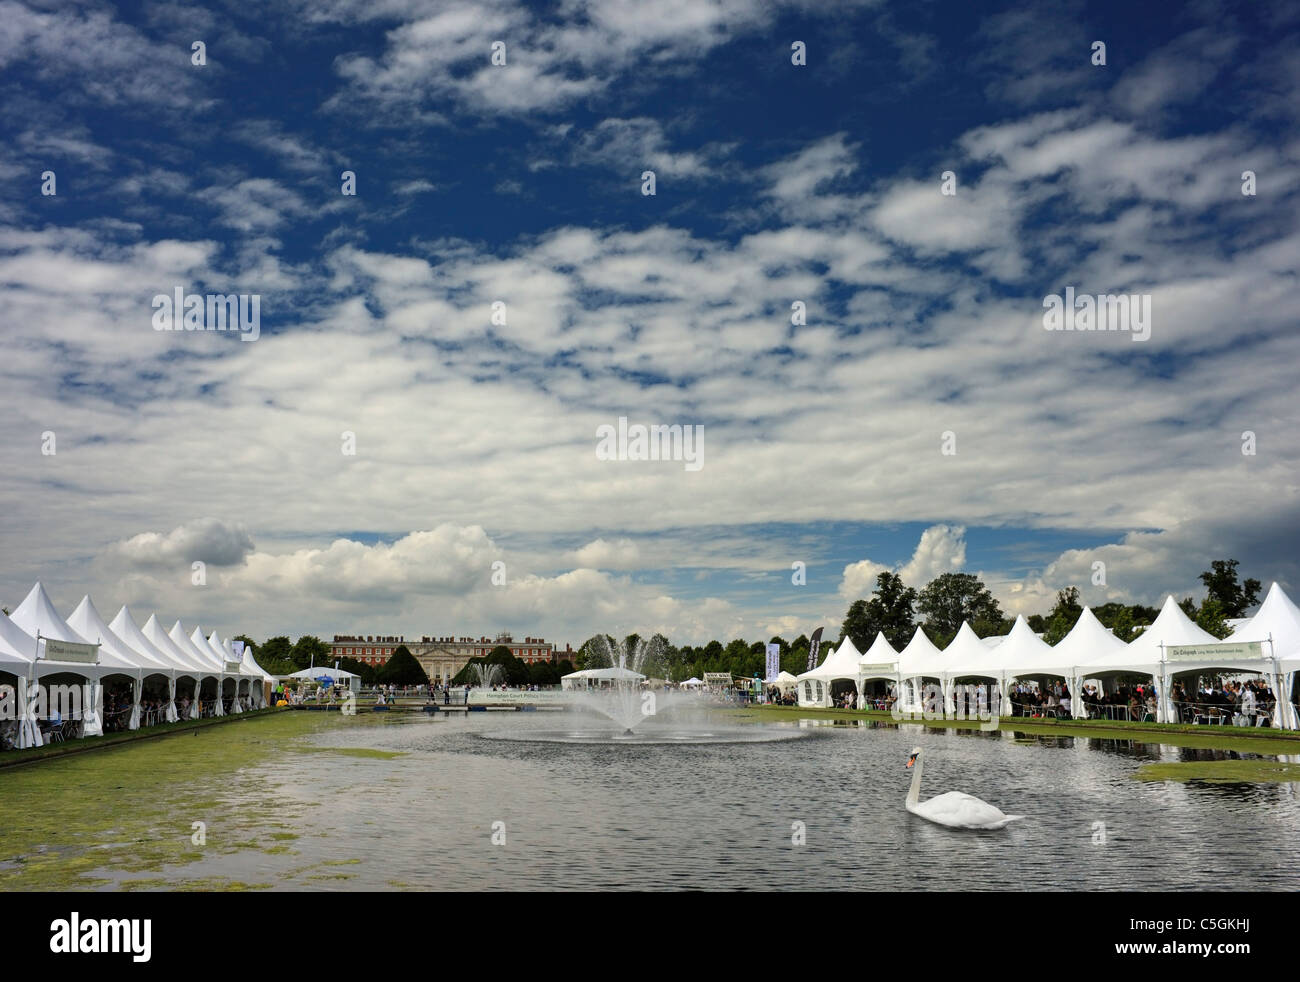 The Long Water lake at the Hampton Court Palace flower show. Stock Photo